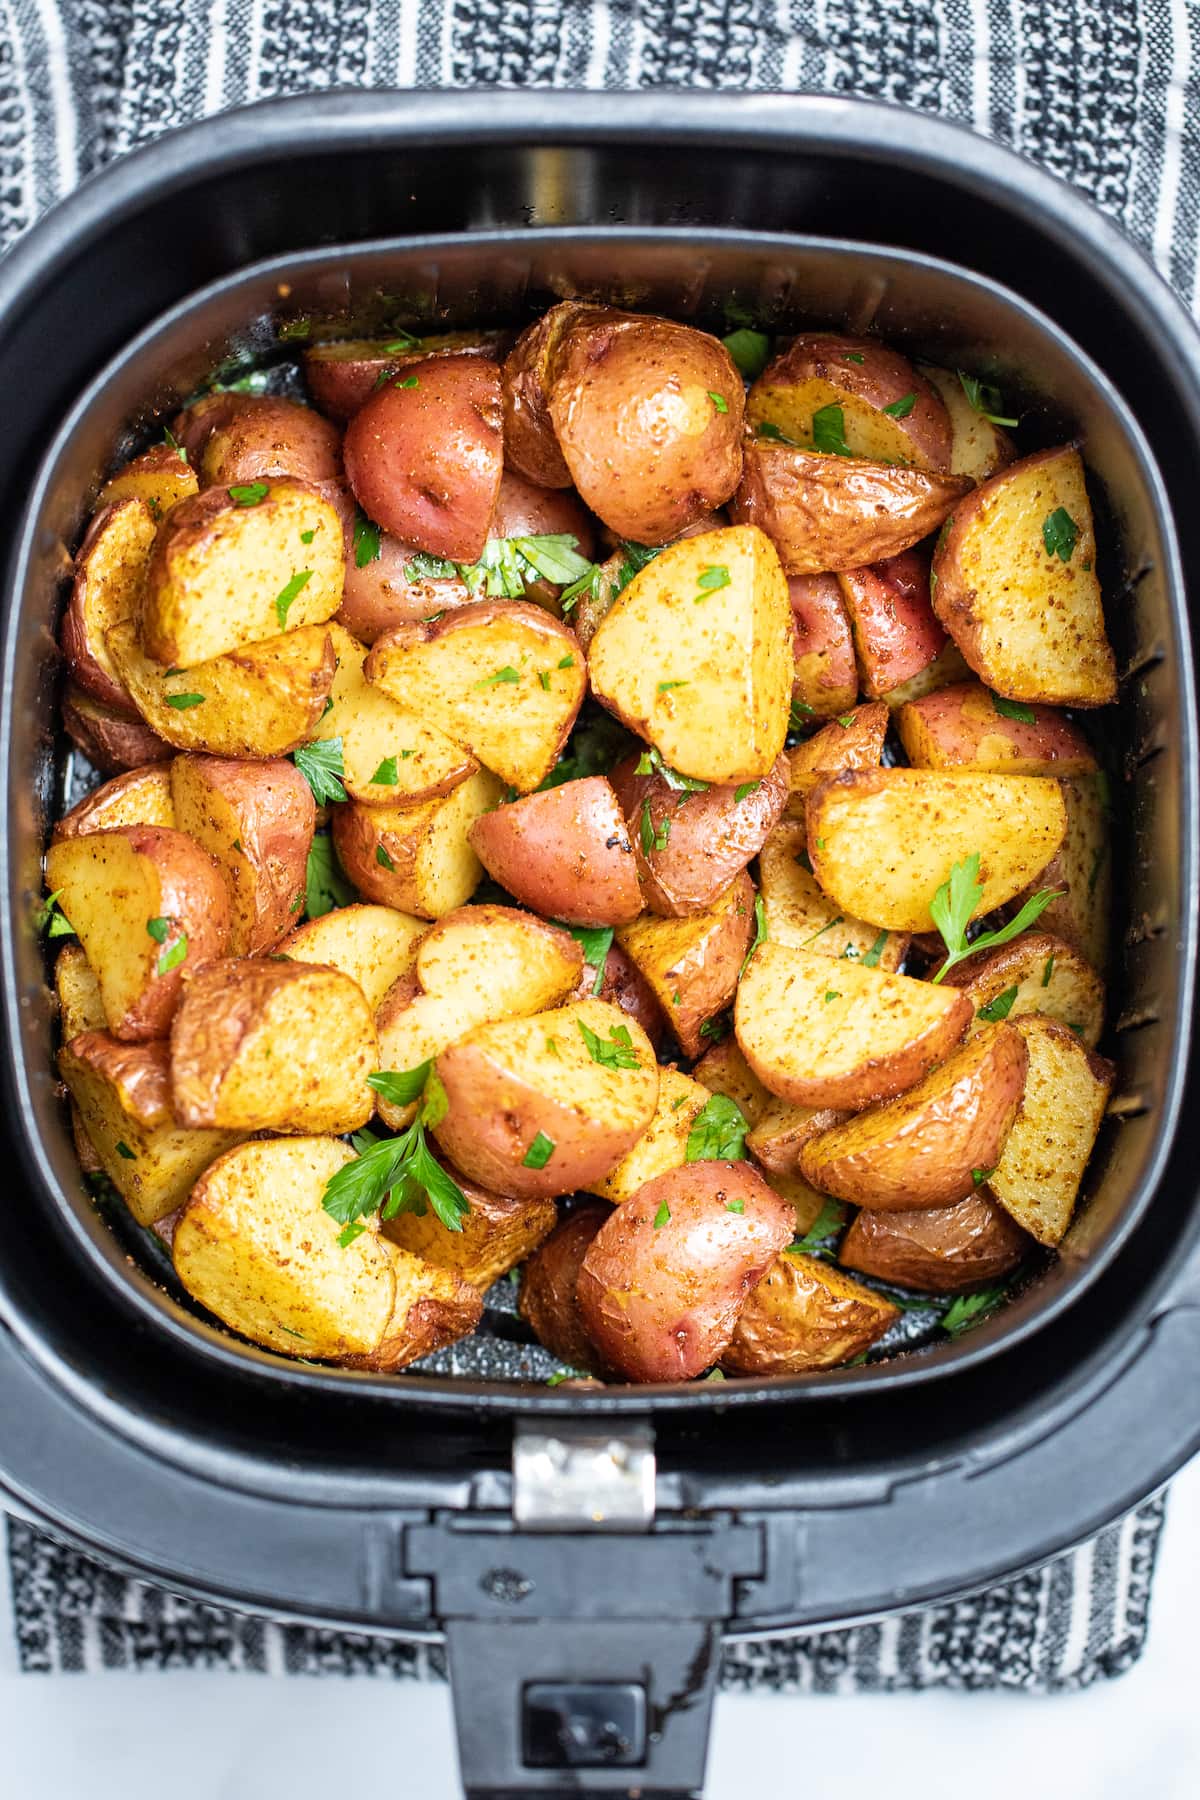 How Long To Cook Red Potatoes In Air Fryer